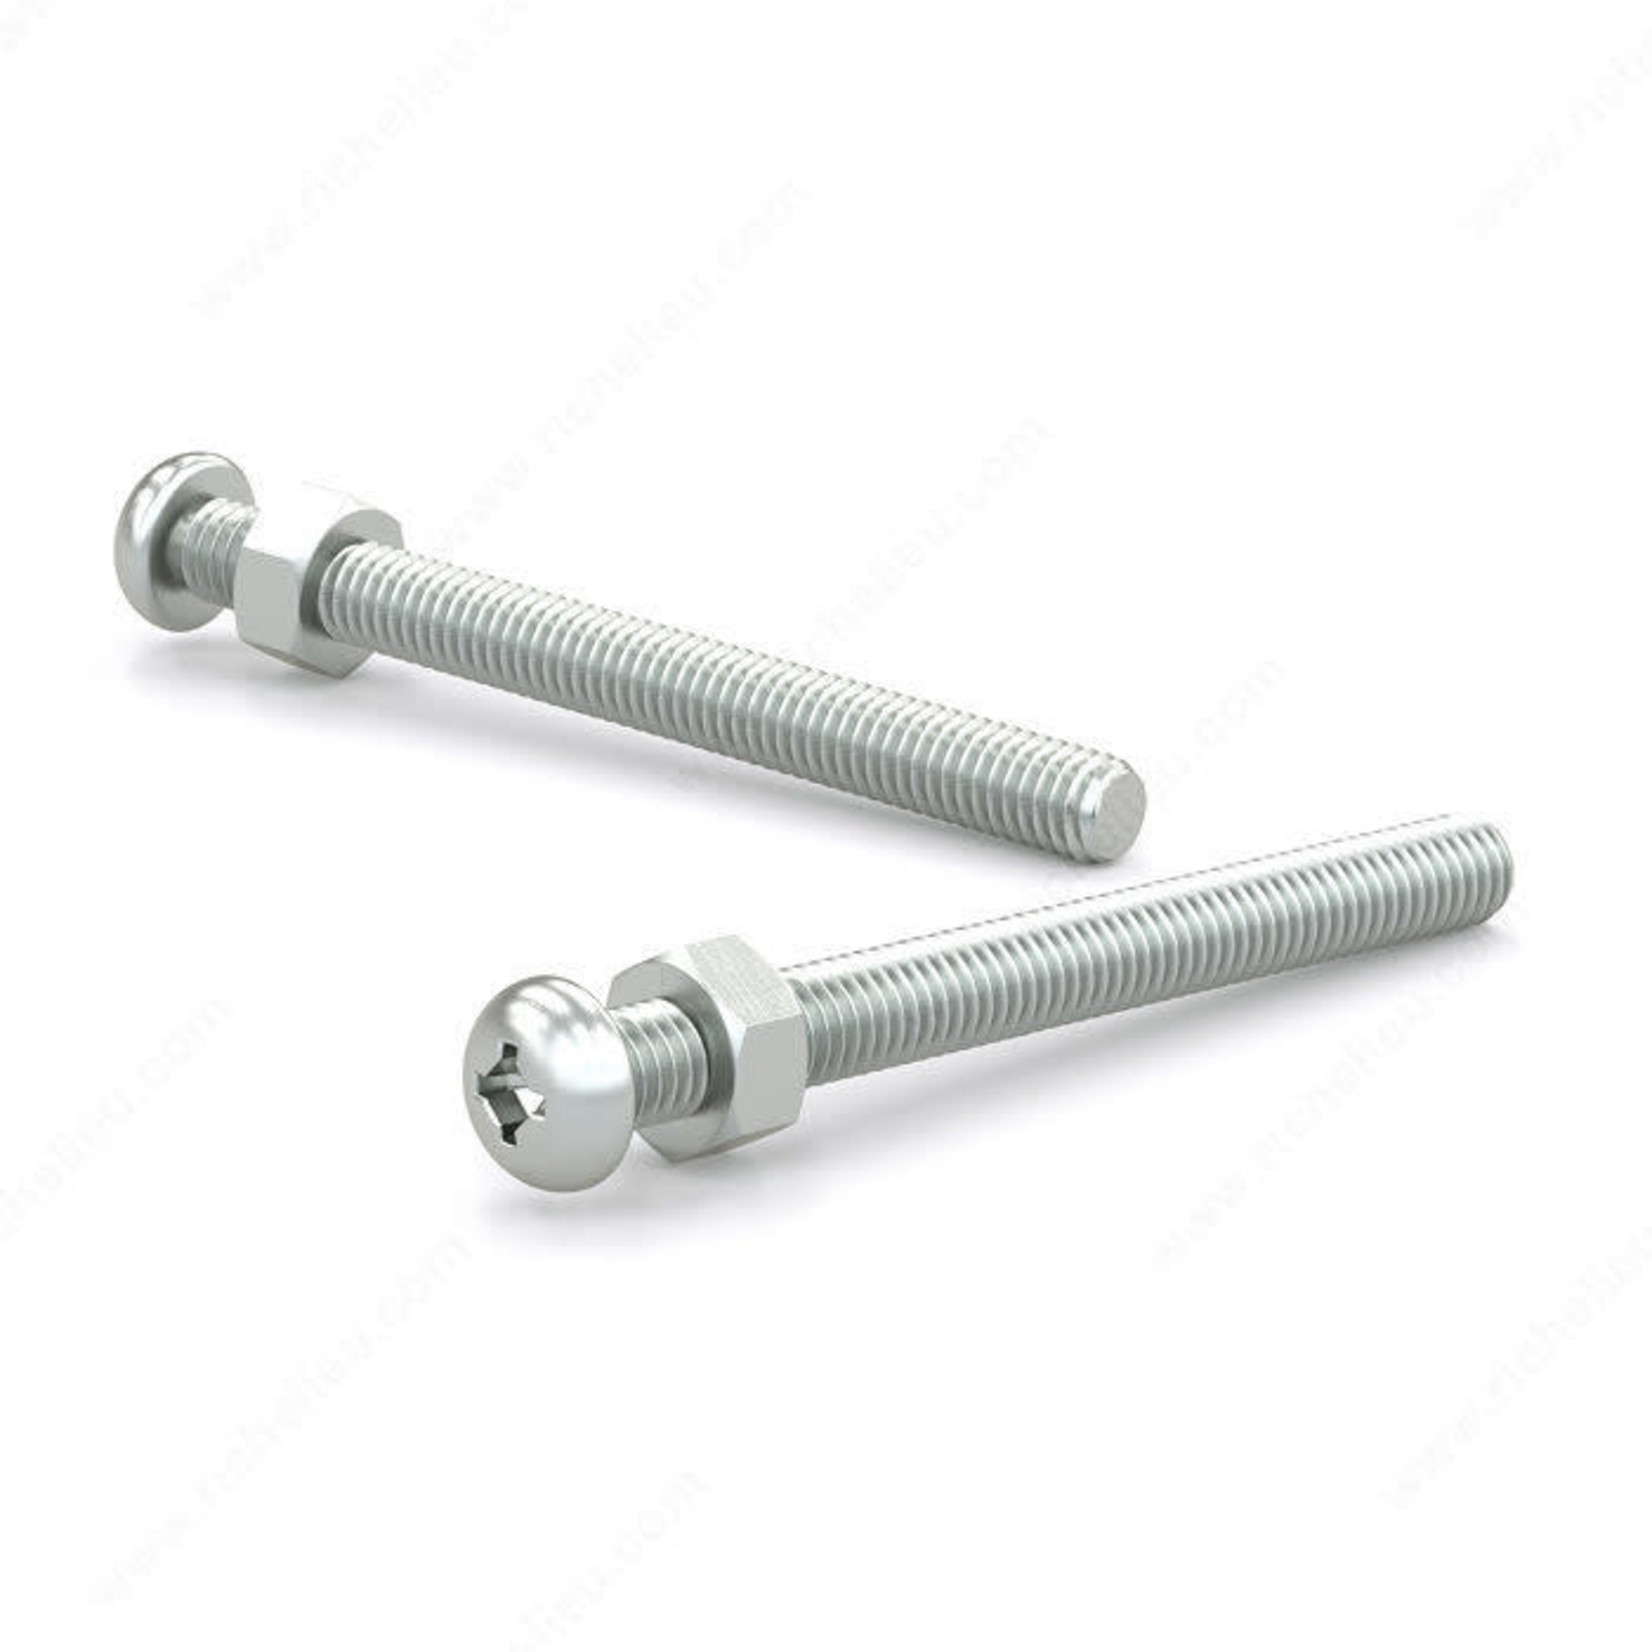 RELIABLE MACHINE SCREW WITH NUT, PAN HEAD, 10-24 3IN, 6PK BLISTER